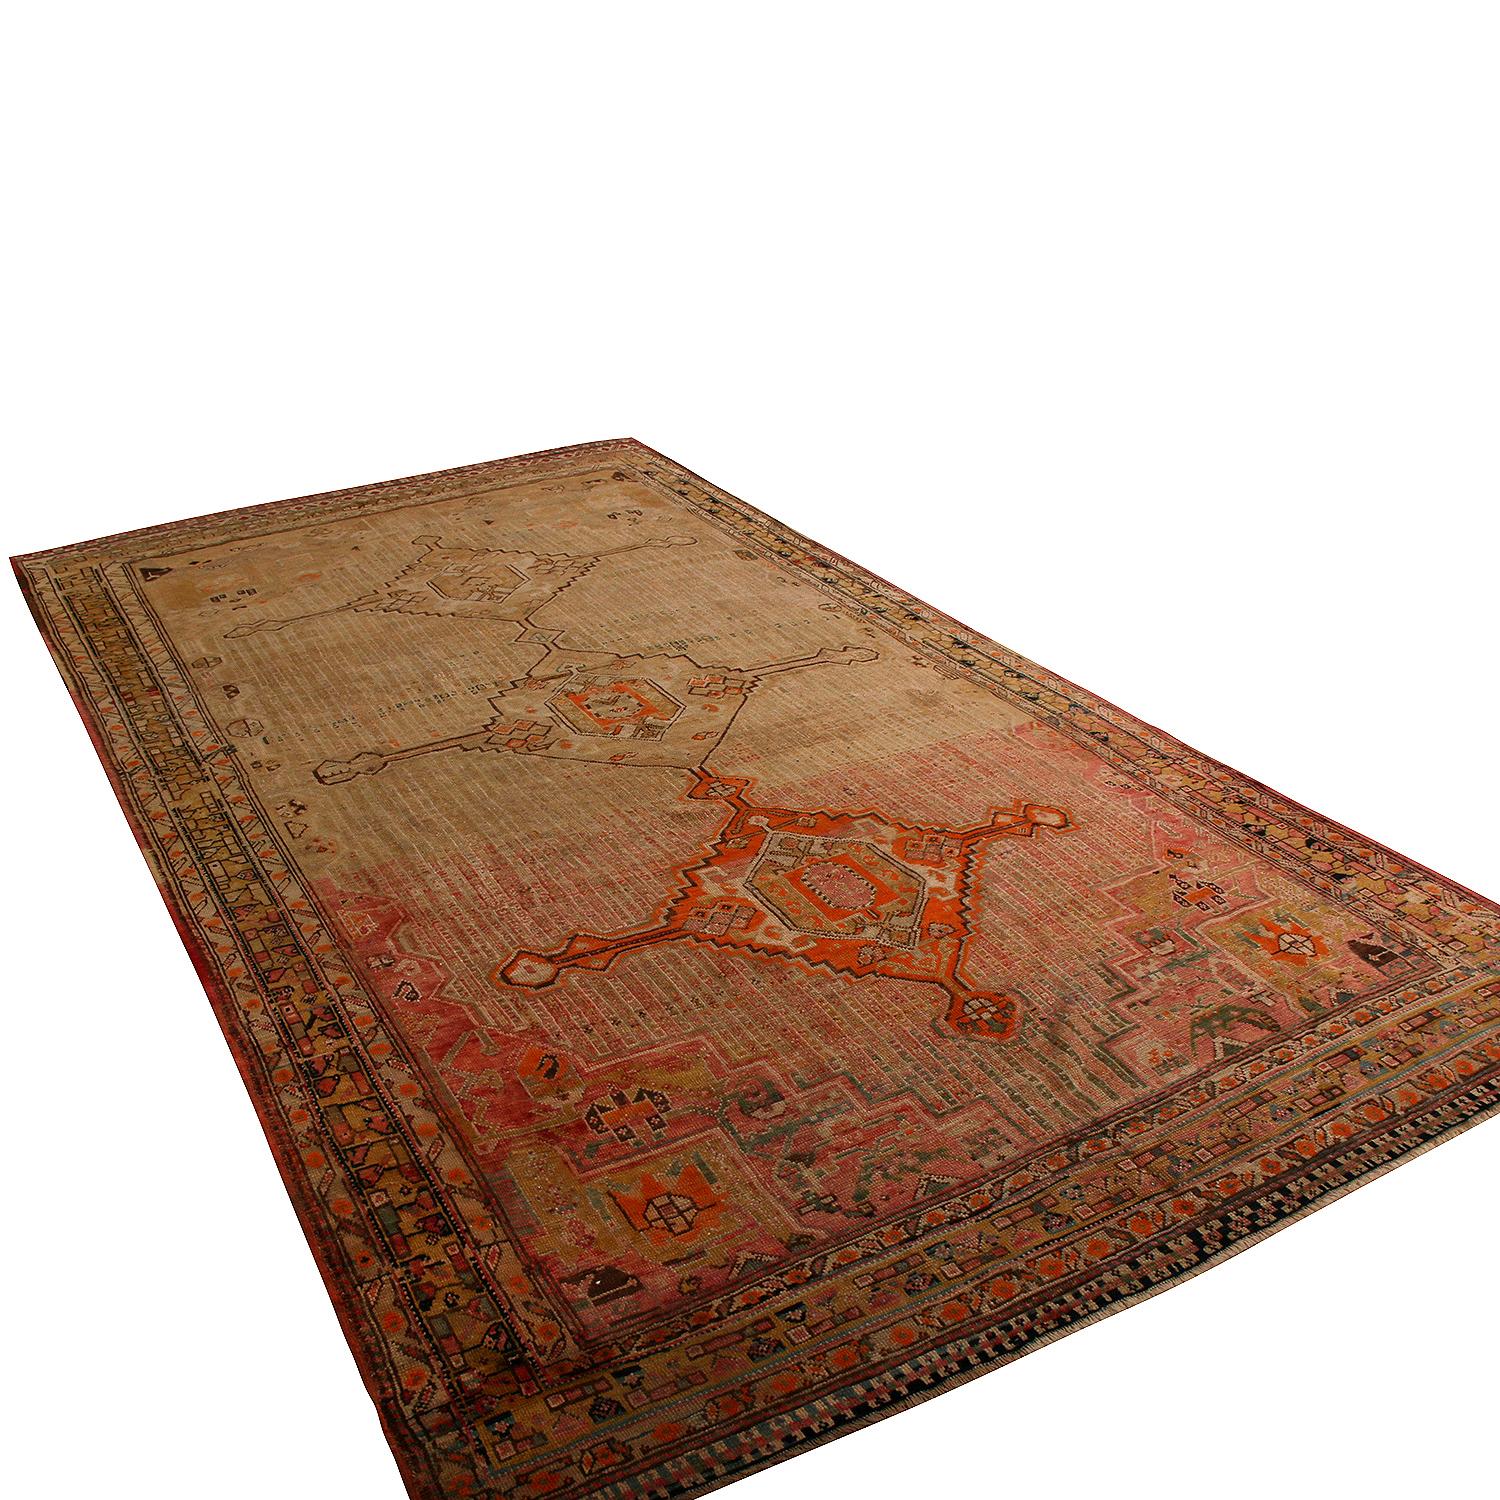 Hand-Woven Antique Qashqai Persian Rug in Beige-Brown with Red Medallions, from Rug & Kilim For Sale